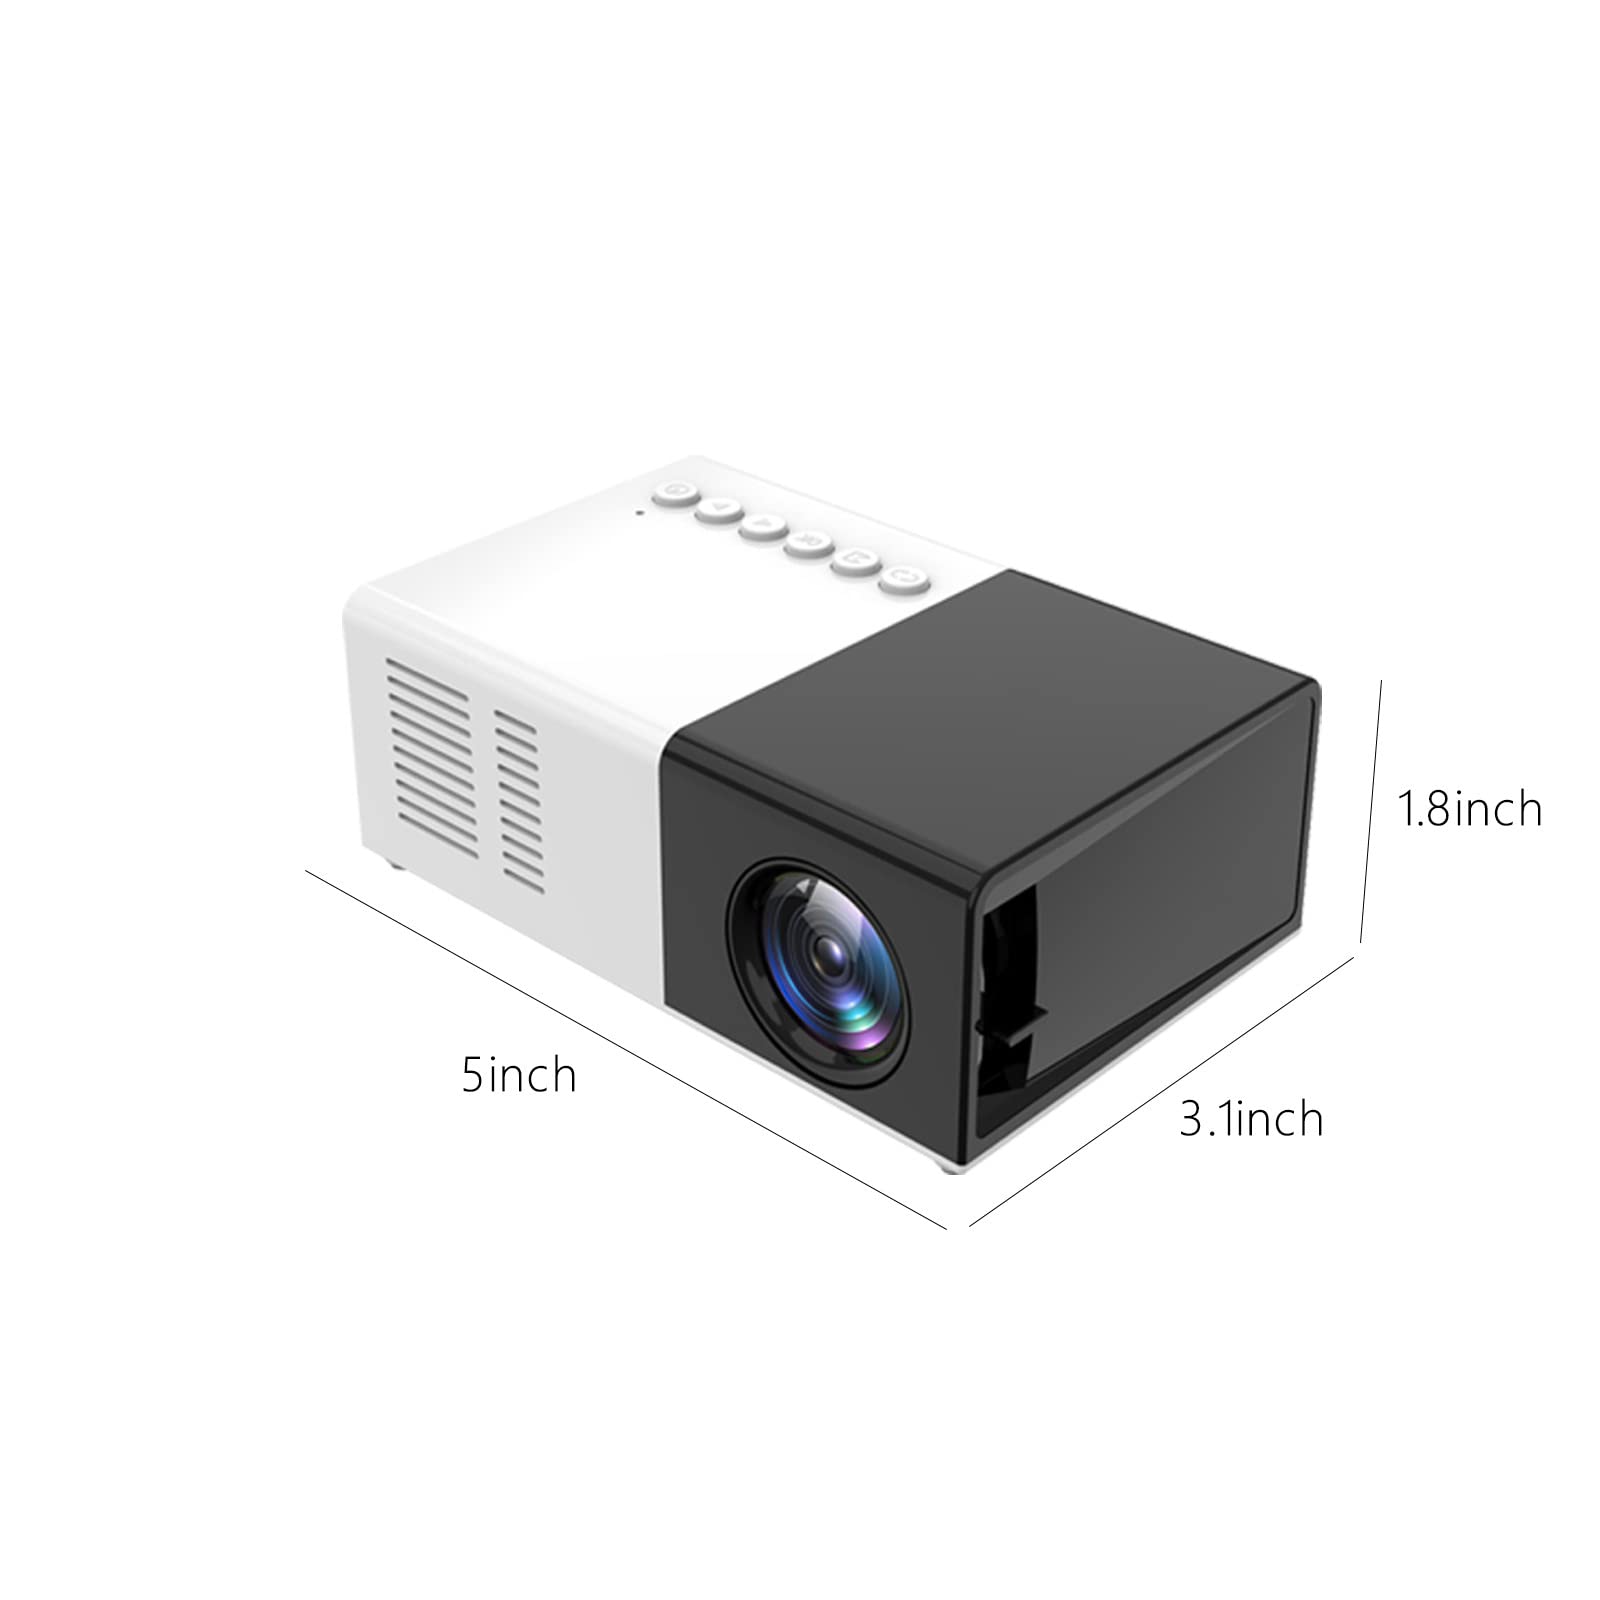 Mini Video Projector 1080P Portable Projector Compatible with HDMI| AV| USB| Laptop, Mini TV for Living Room/Bedroom Outdoor Movie Projector Tech Gadgets Cool Stuff Personalized Gifts (Blue)